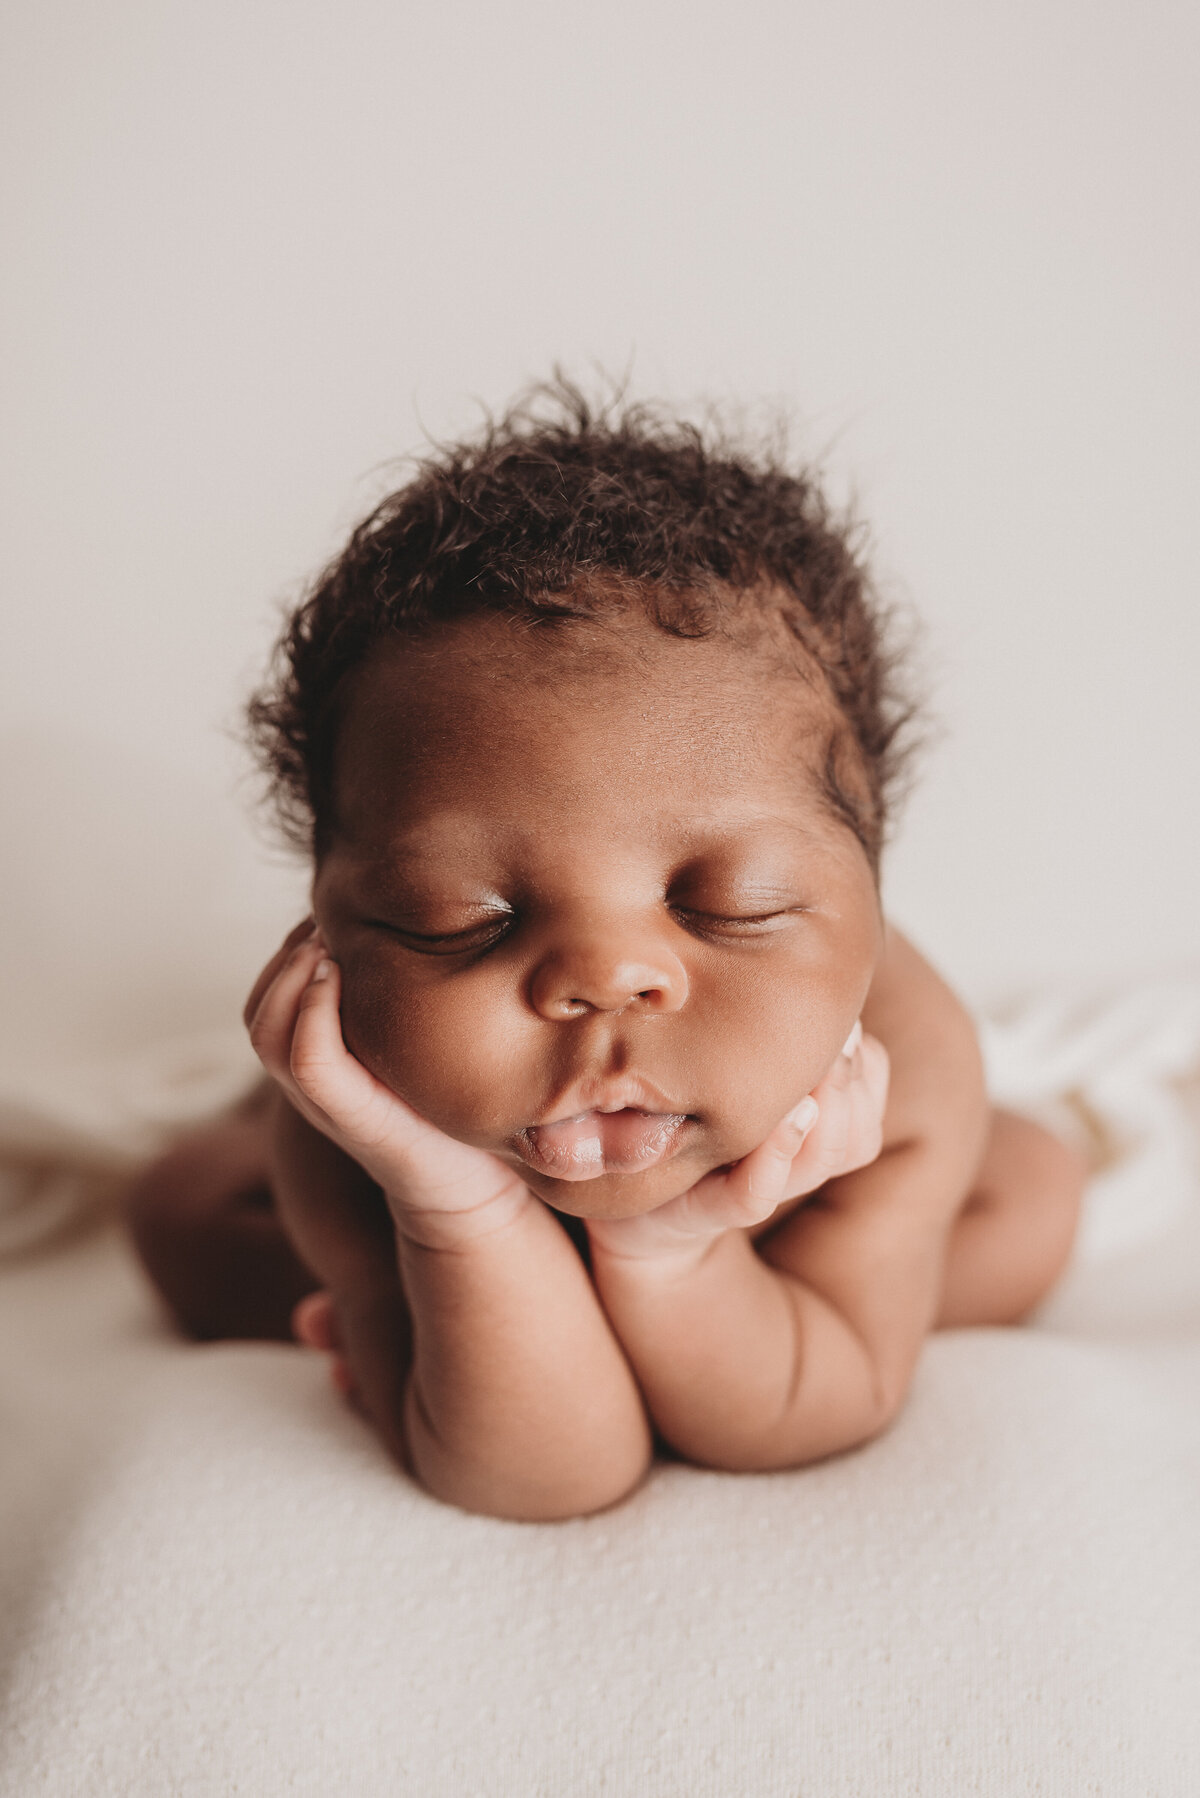 2 week old baby boy with chin on hands asleep on white cloth backdrop